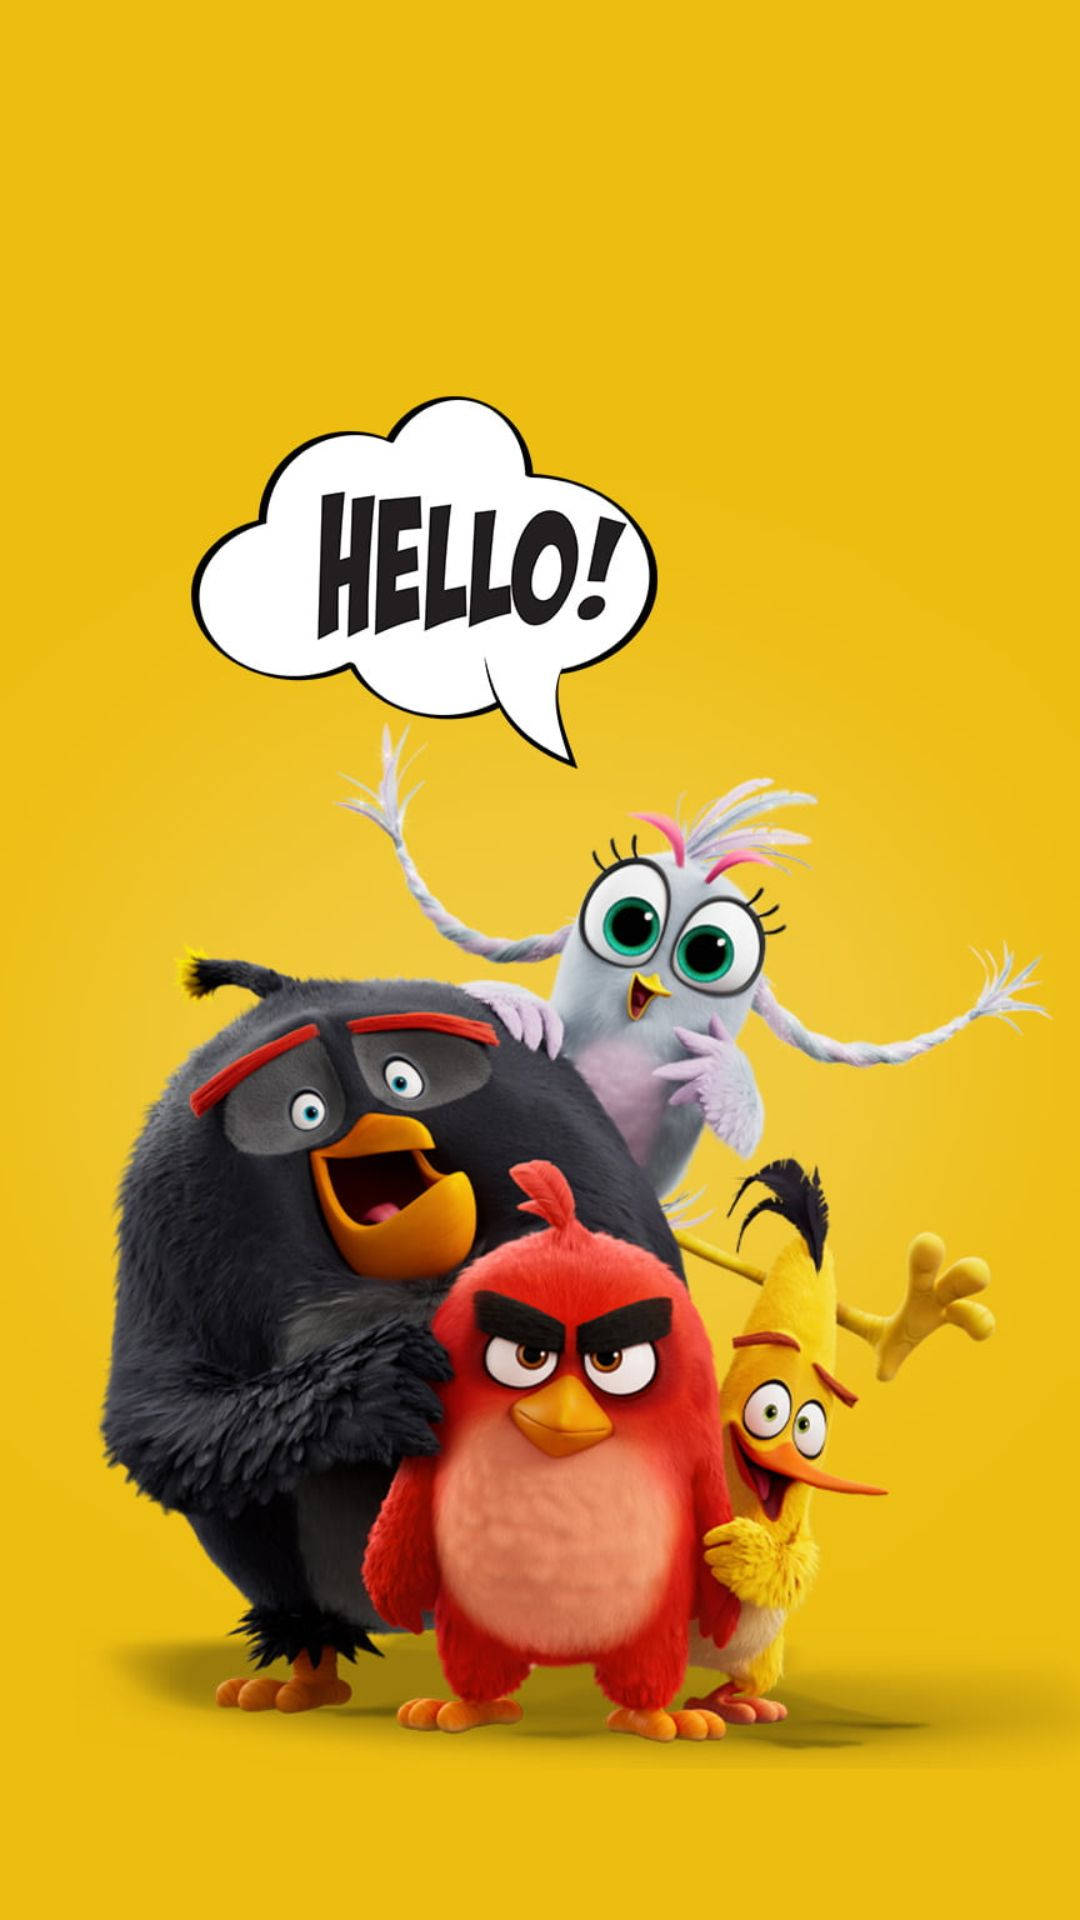 Promotional Poster Of The Angry Birds Movie Wallpaper